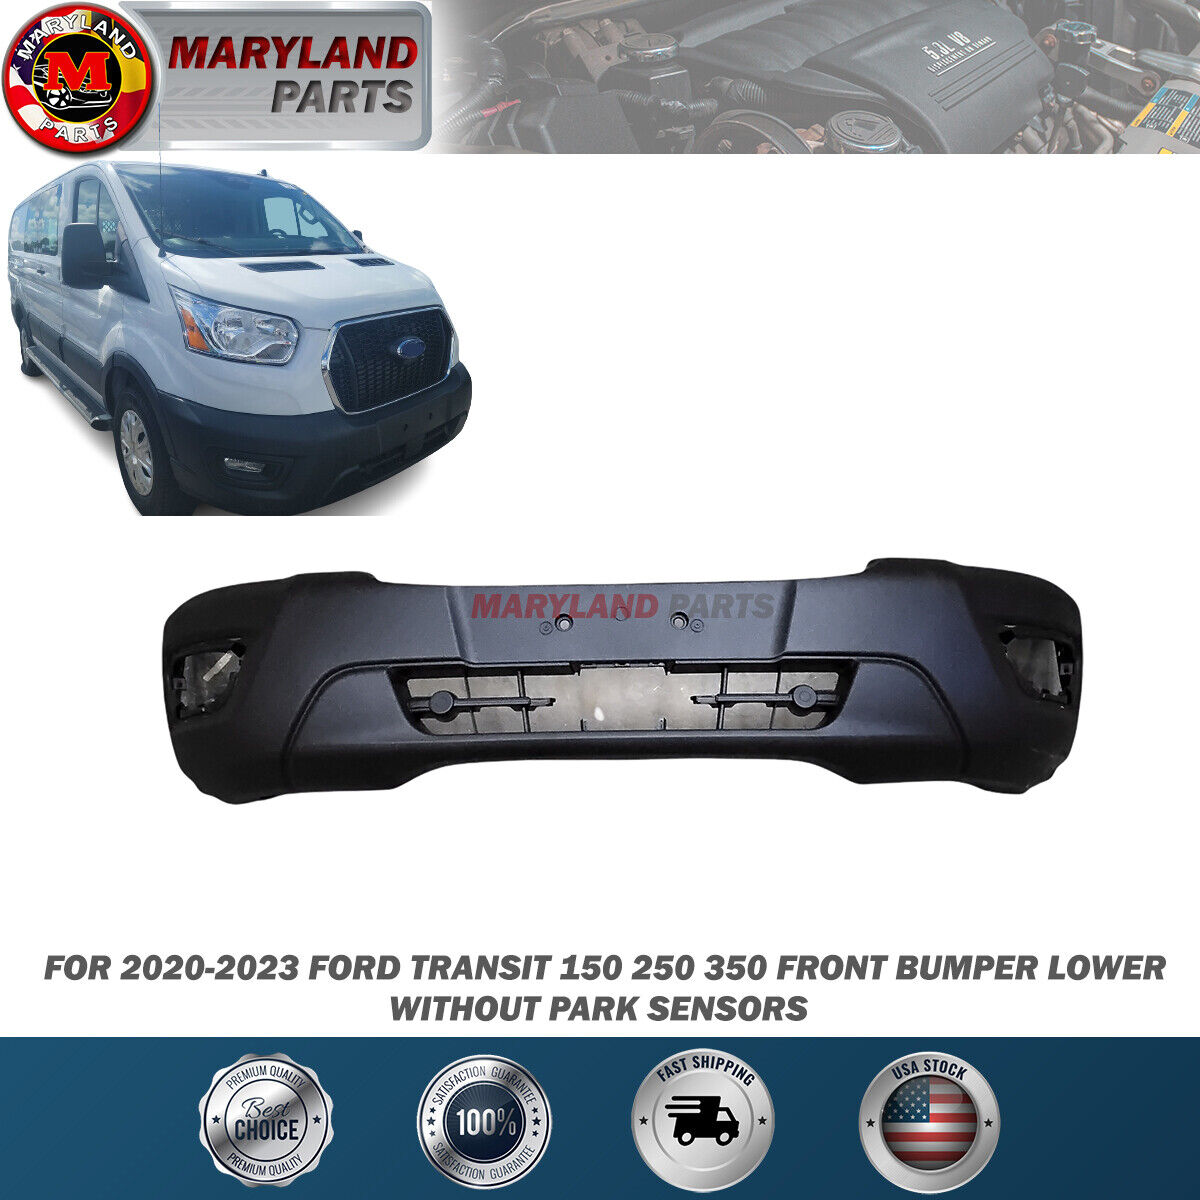 For 2020-2023 Ford Transit 150 250 350 Front Bumper Lower w/o Park Sensors